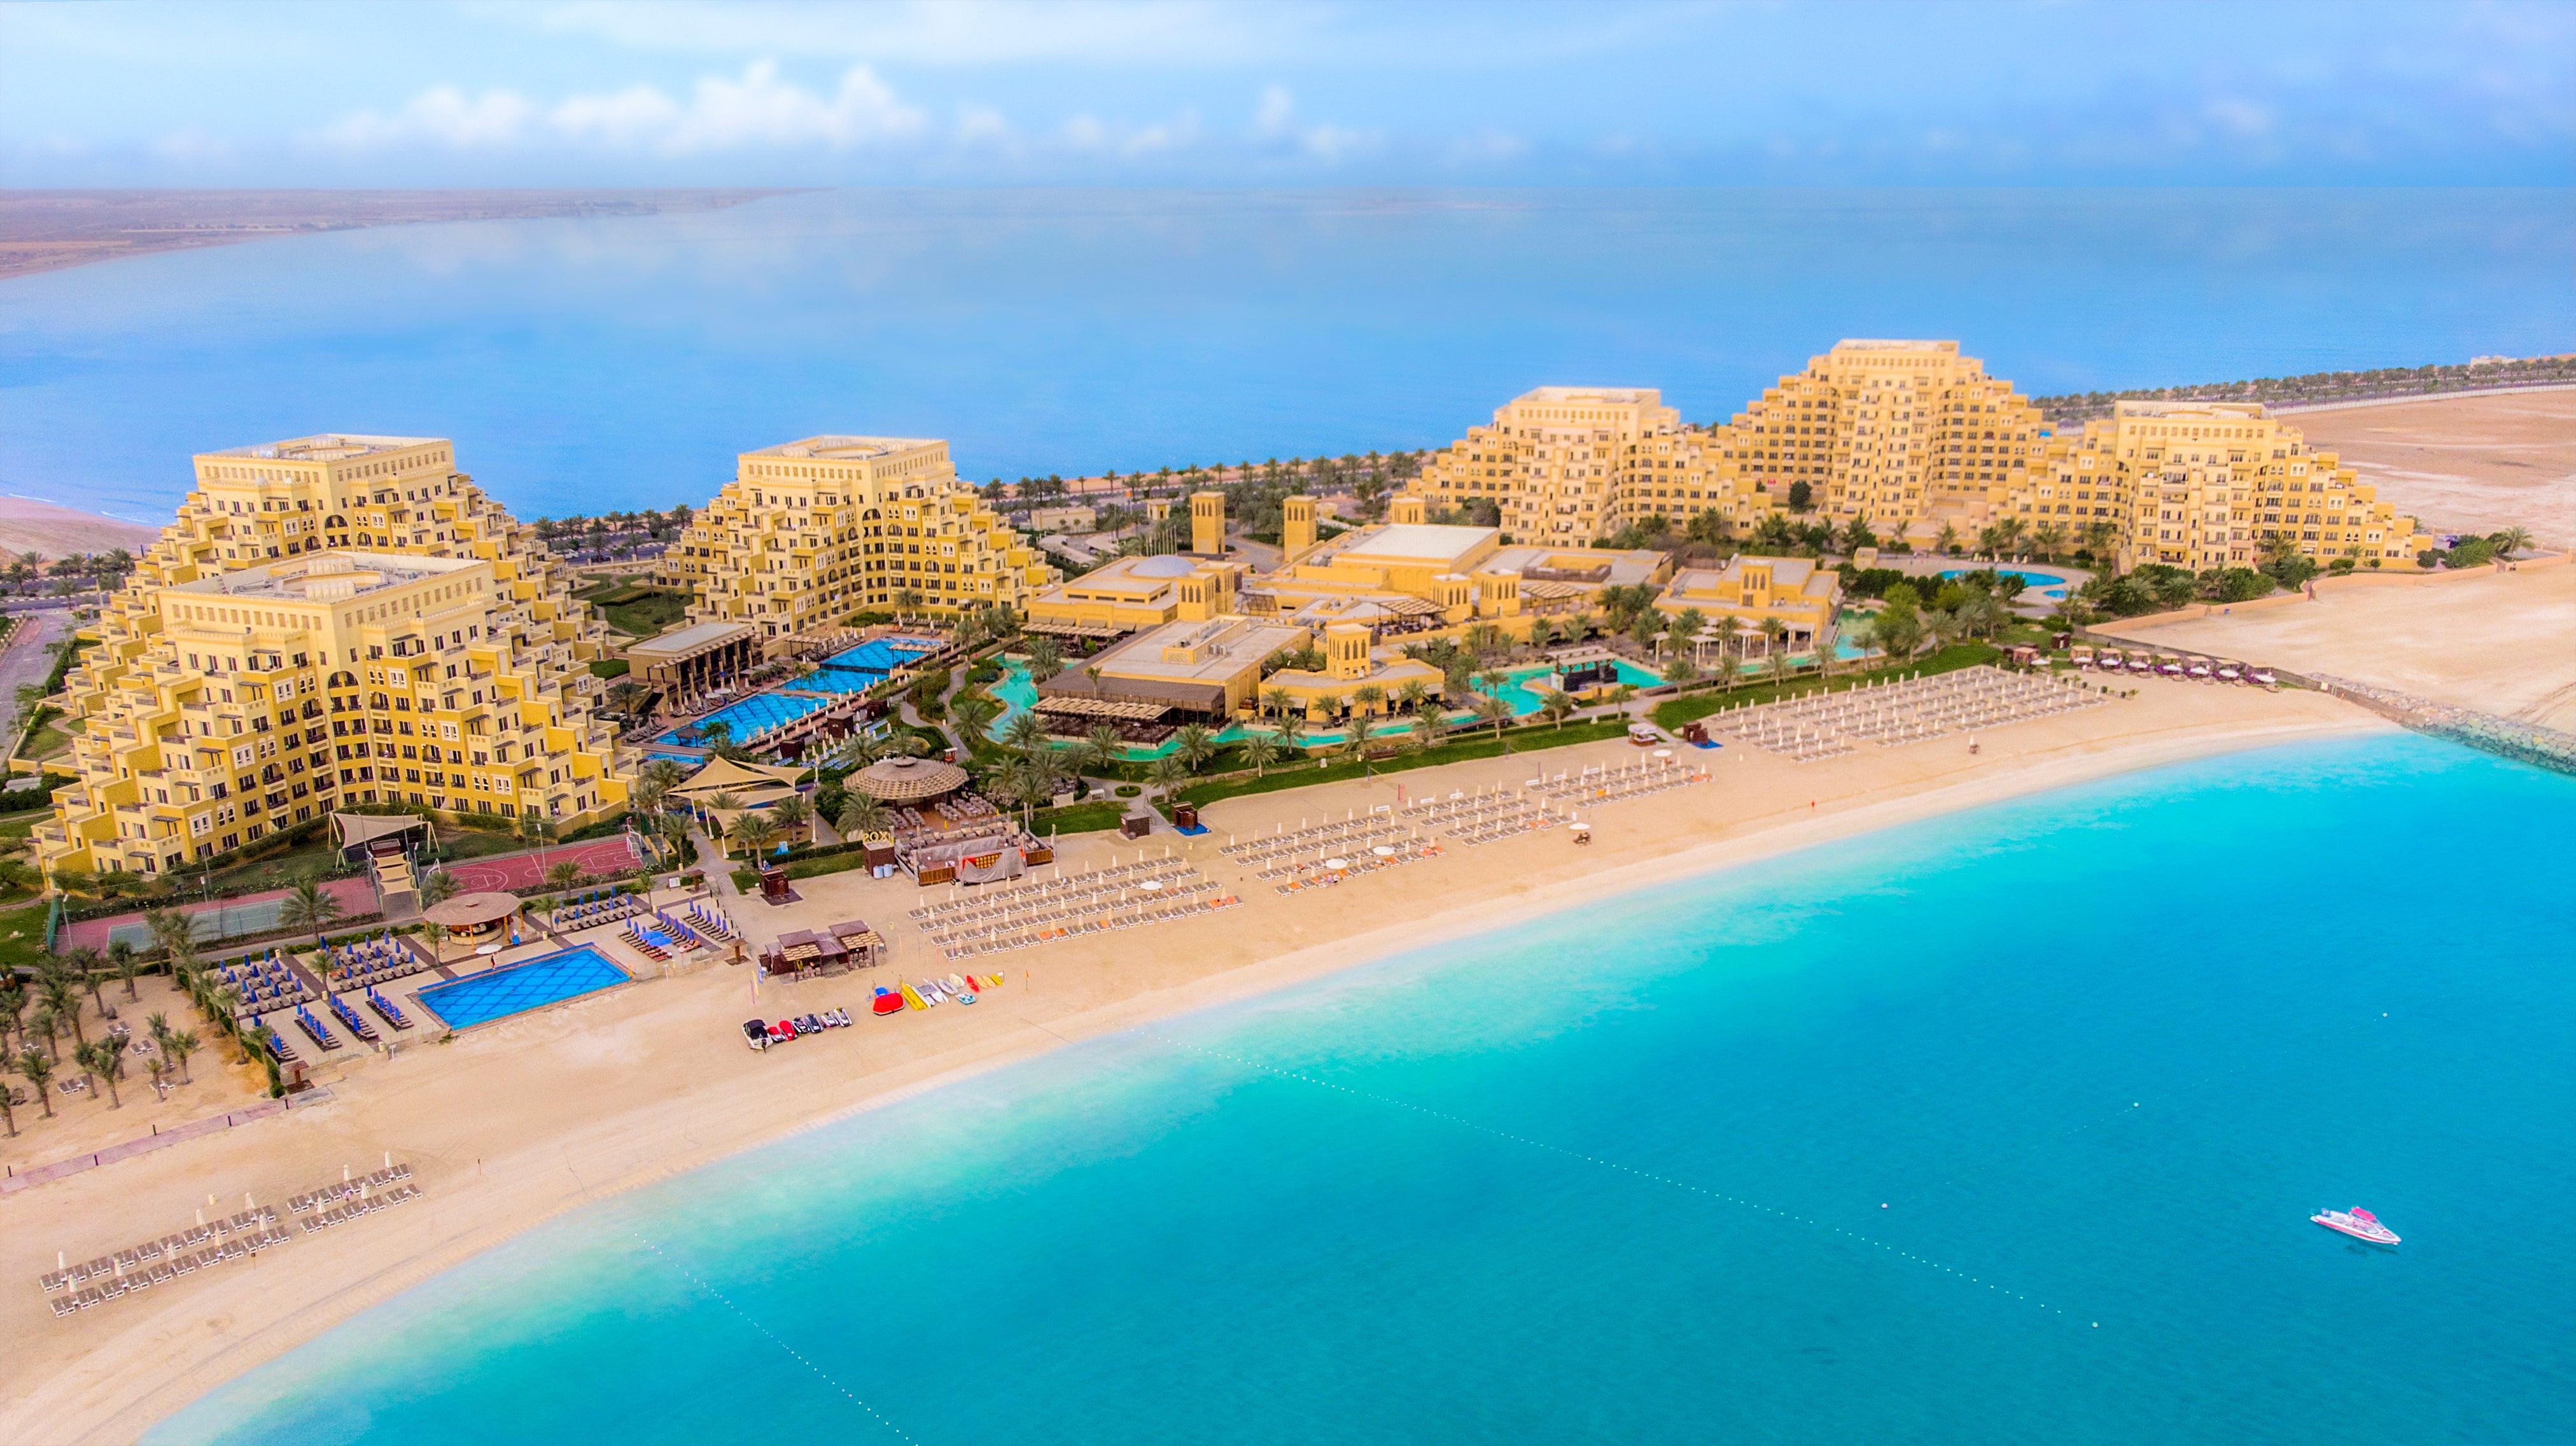 Dial up and dial down your adventures at the The Rixos Bab al Bahr on Al Marjan Island, Dubai